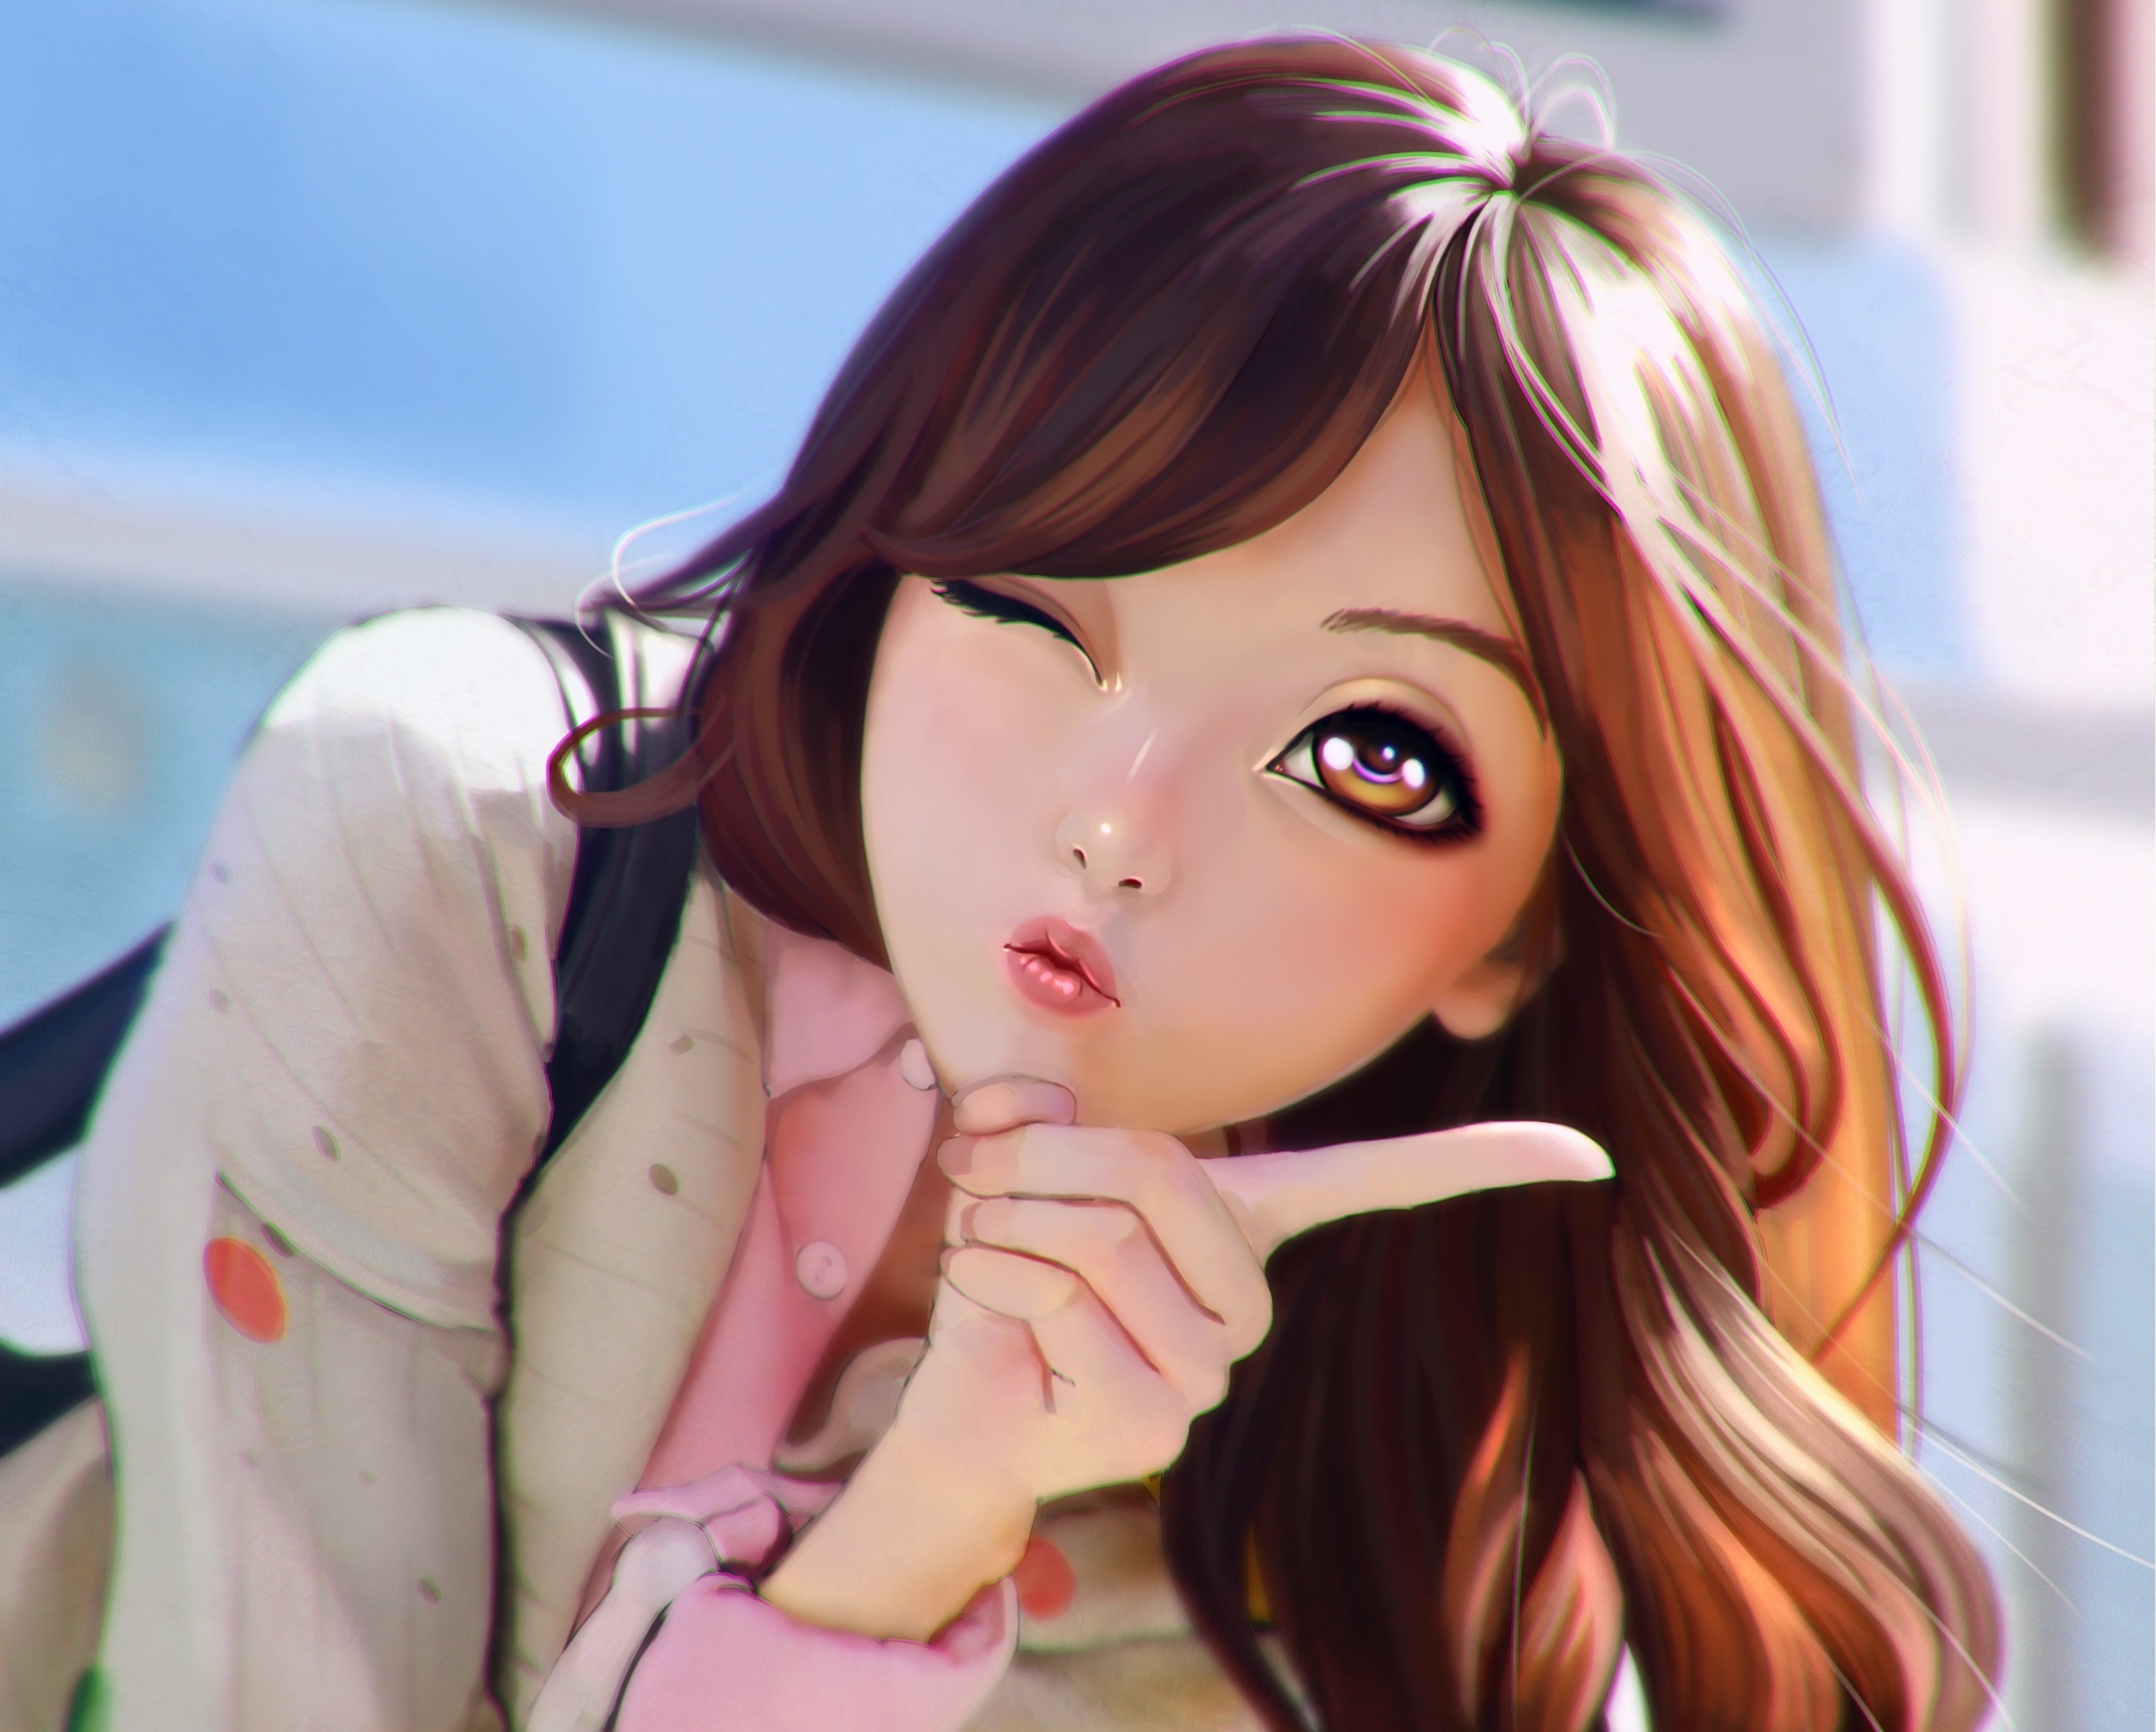 Fingers Face Eyes Lips Hair Anime Anime Girls Winking Wallpapers Hd Desktop And Mobile Backgrounds Find and save images from the matching pfps collection by dani🌸 (octoomy) on we heart it, your everyday app to get lost in what you love. wallup net